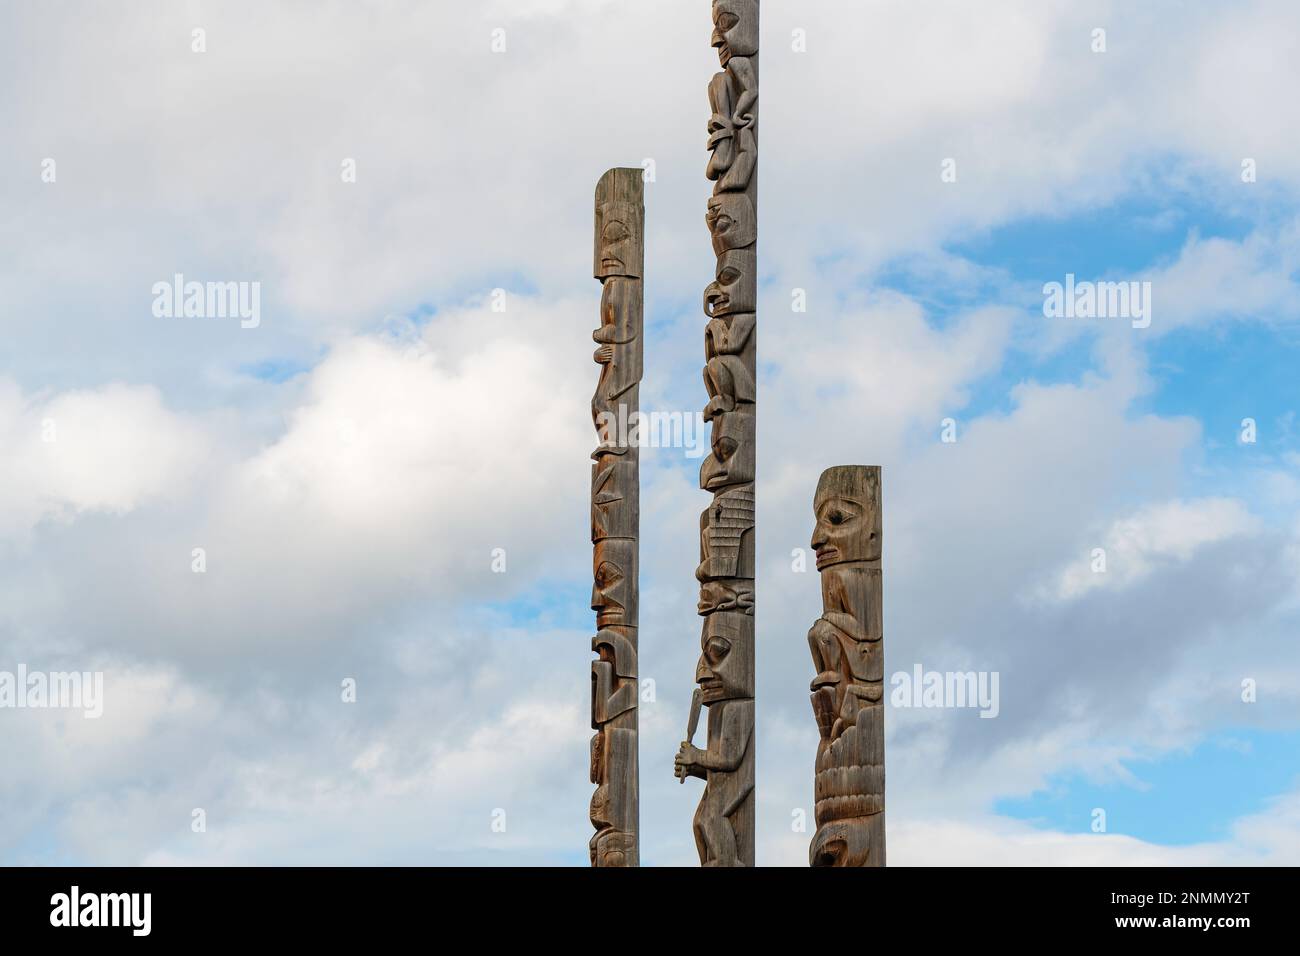 First nation totem poles of the Gitxsan natives in Gitanyow or Kitwancool, British Columbia, Canada. Stock Photo